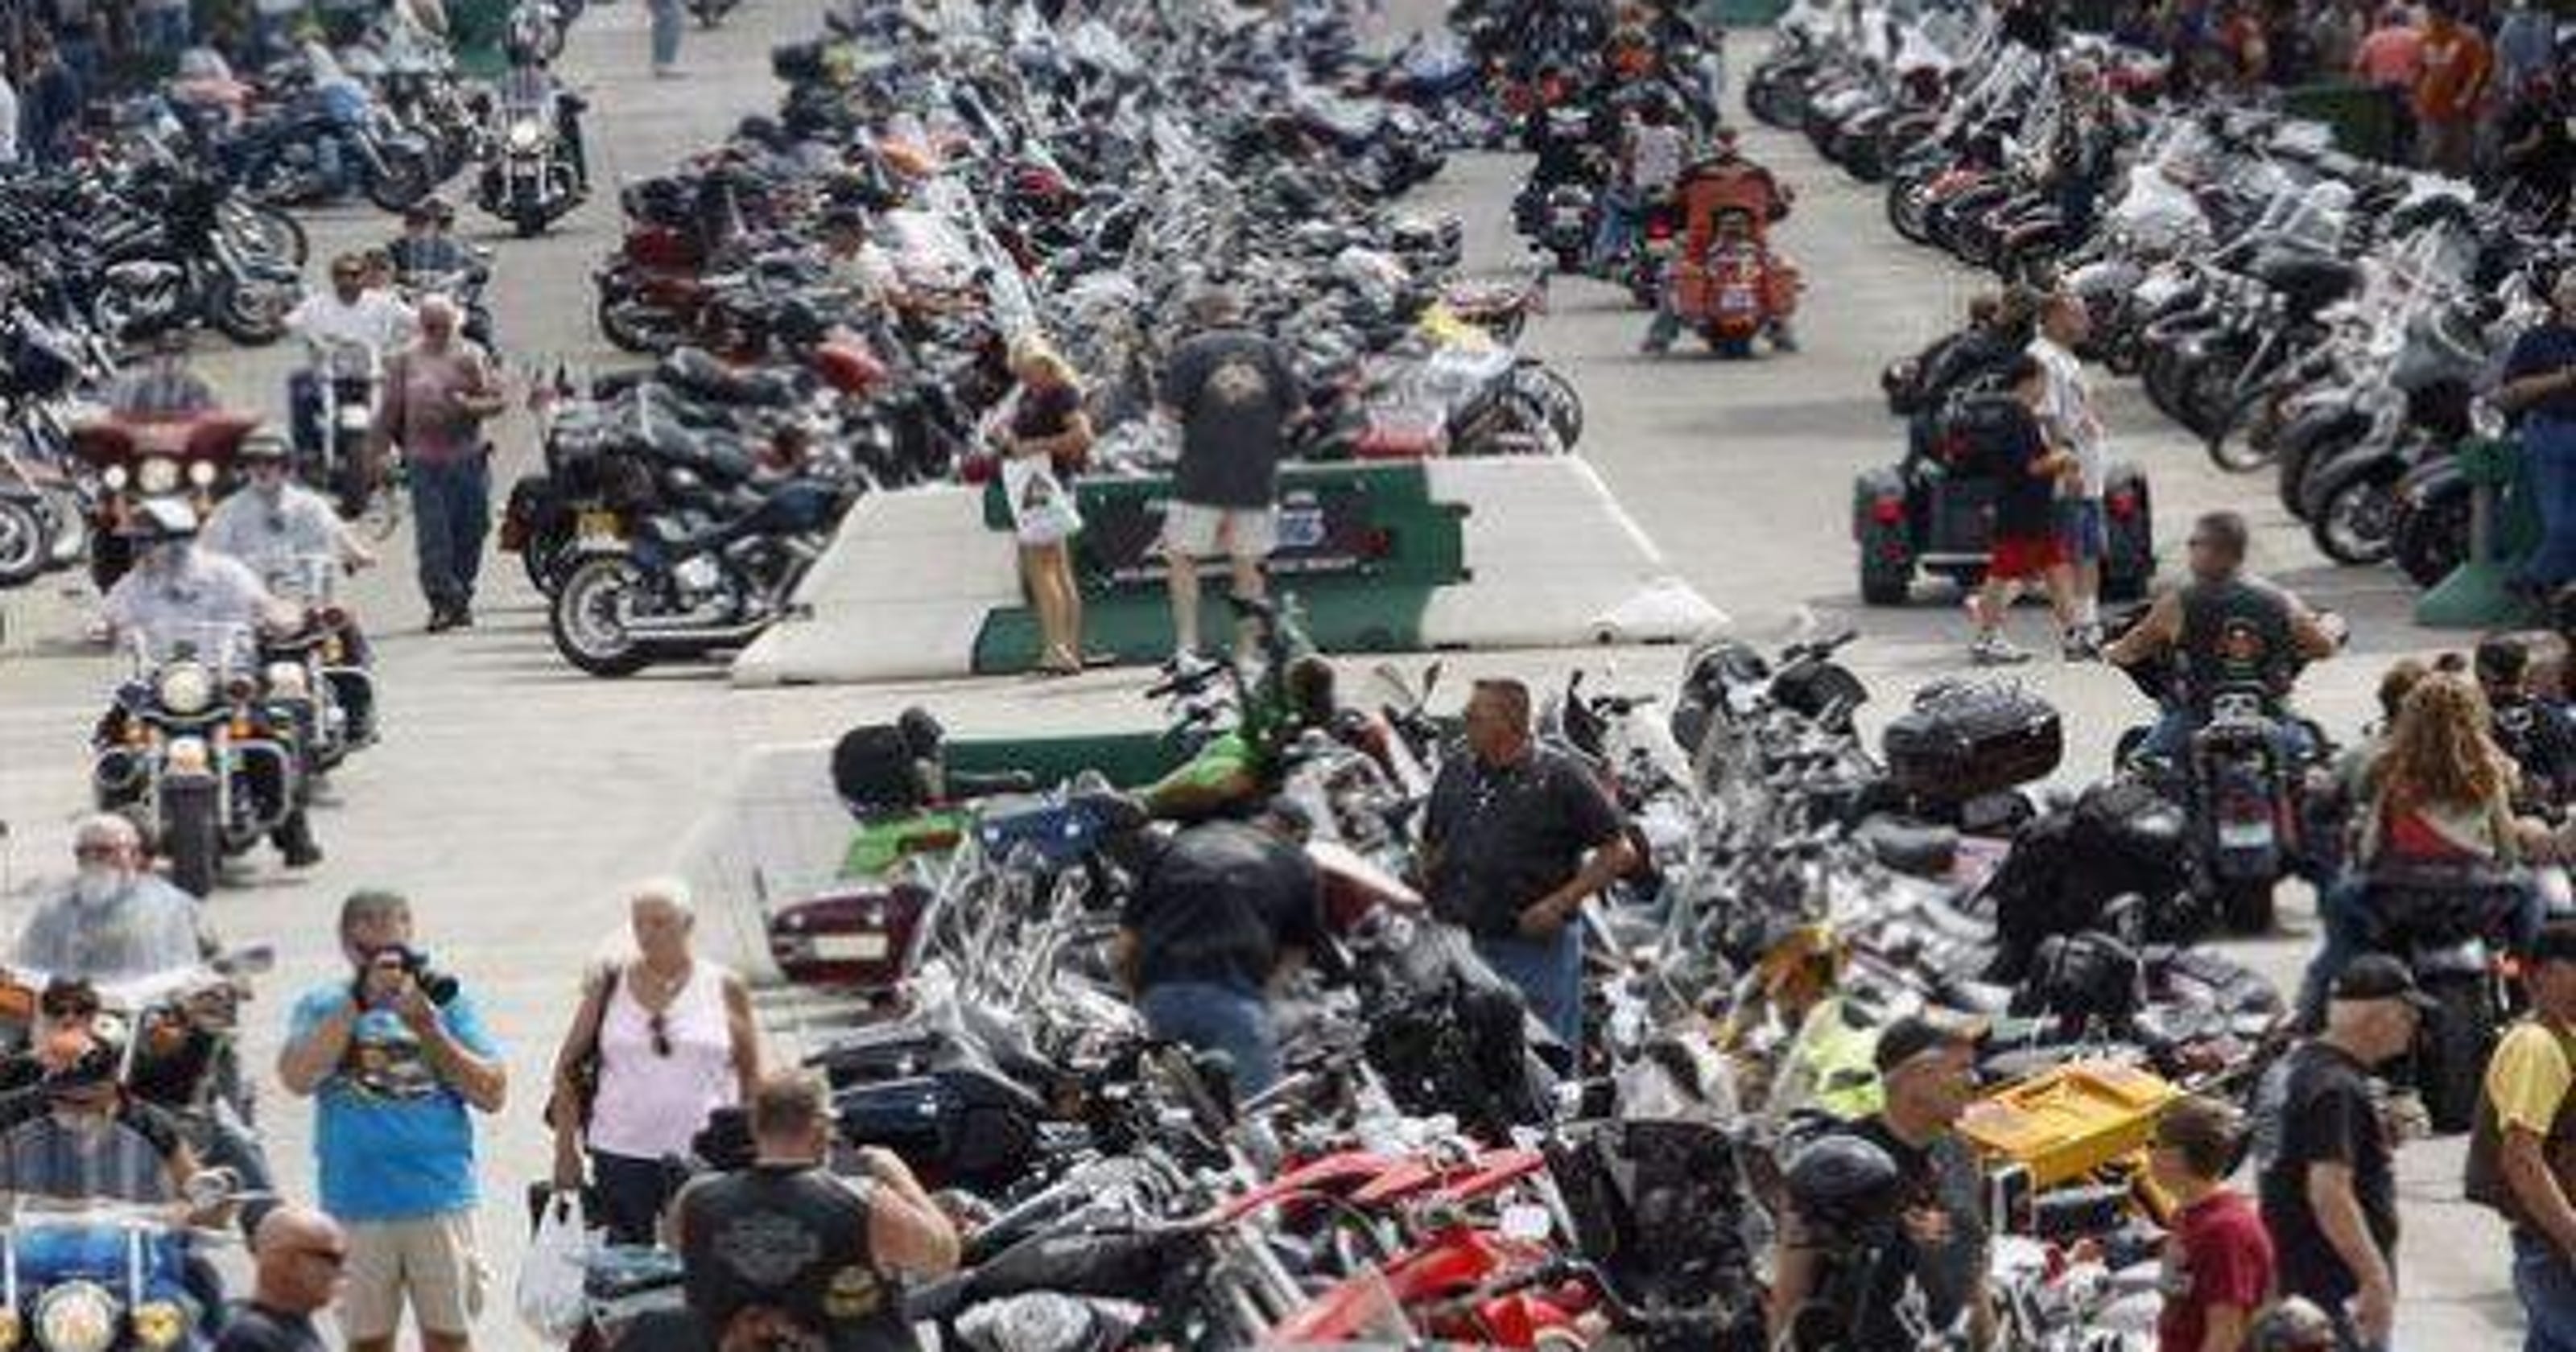 Sturgis rally deaths at nine after multimotorcycle crash